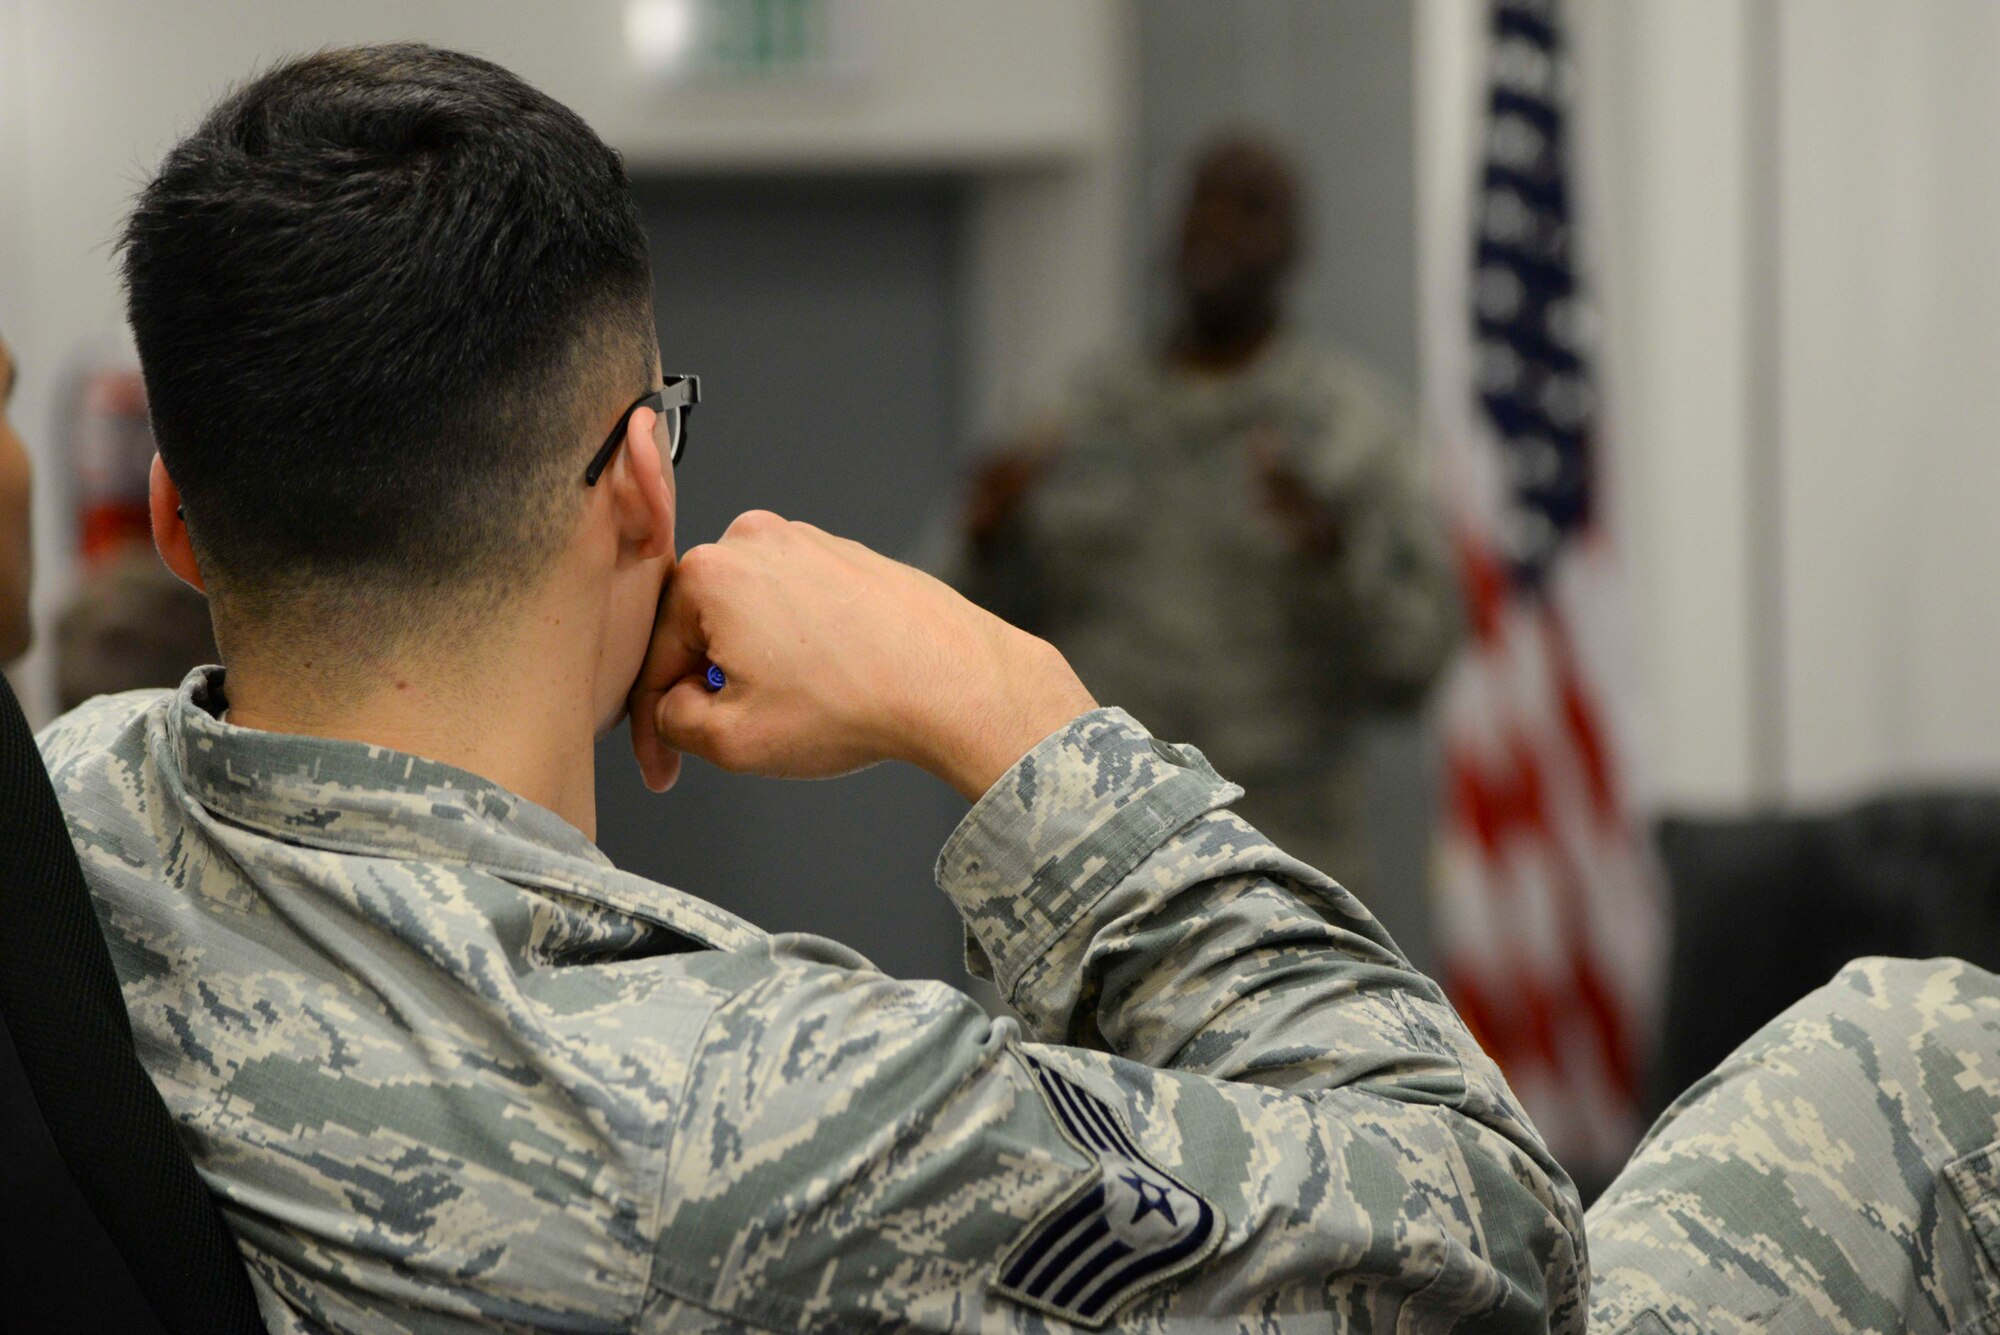 A noncommissioned officer listens to a panel of senior noncommissioned officers at the second annual Atlantic Stripe Conference at the U.S. Air Forces in Europe and Air Forces Africa conference room on Ramstein Air Base, Germany, May 17, 2018. During the professional development conference NCOs listened to leaders, mentors, and guest speakers advise them on different fundamentals and principles of leadership. (U.S. Air Force photo by Airman 1st Class D. Blake Browning)